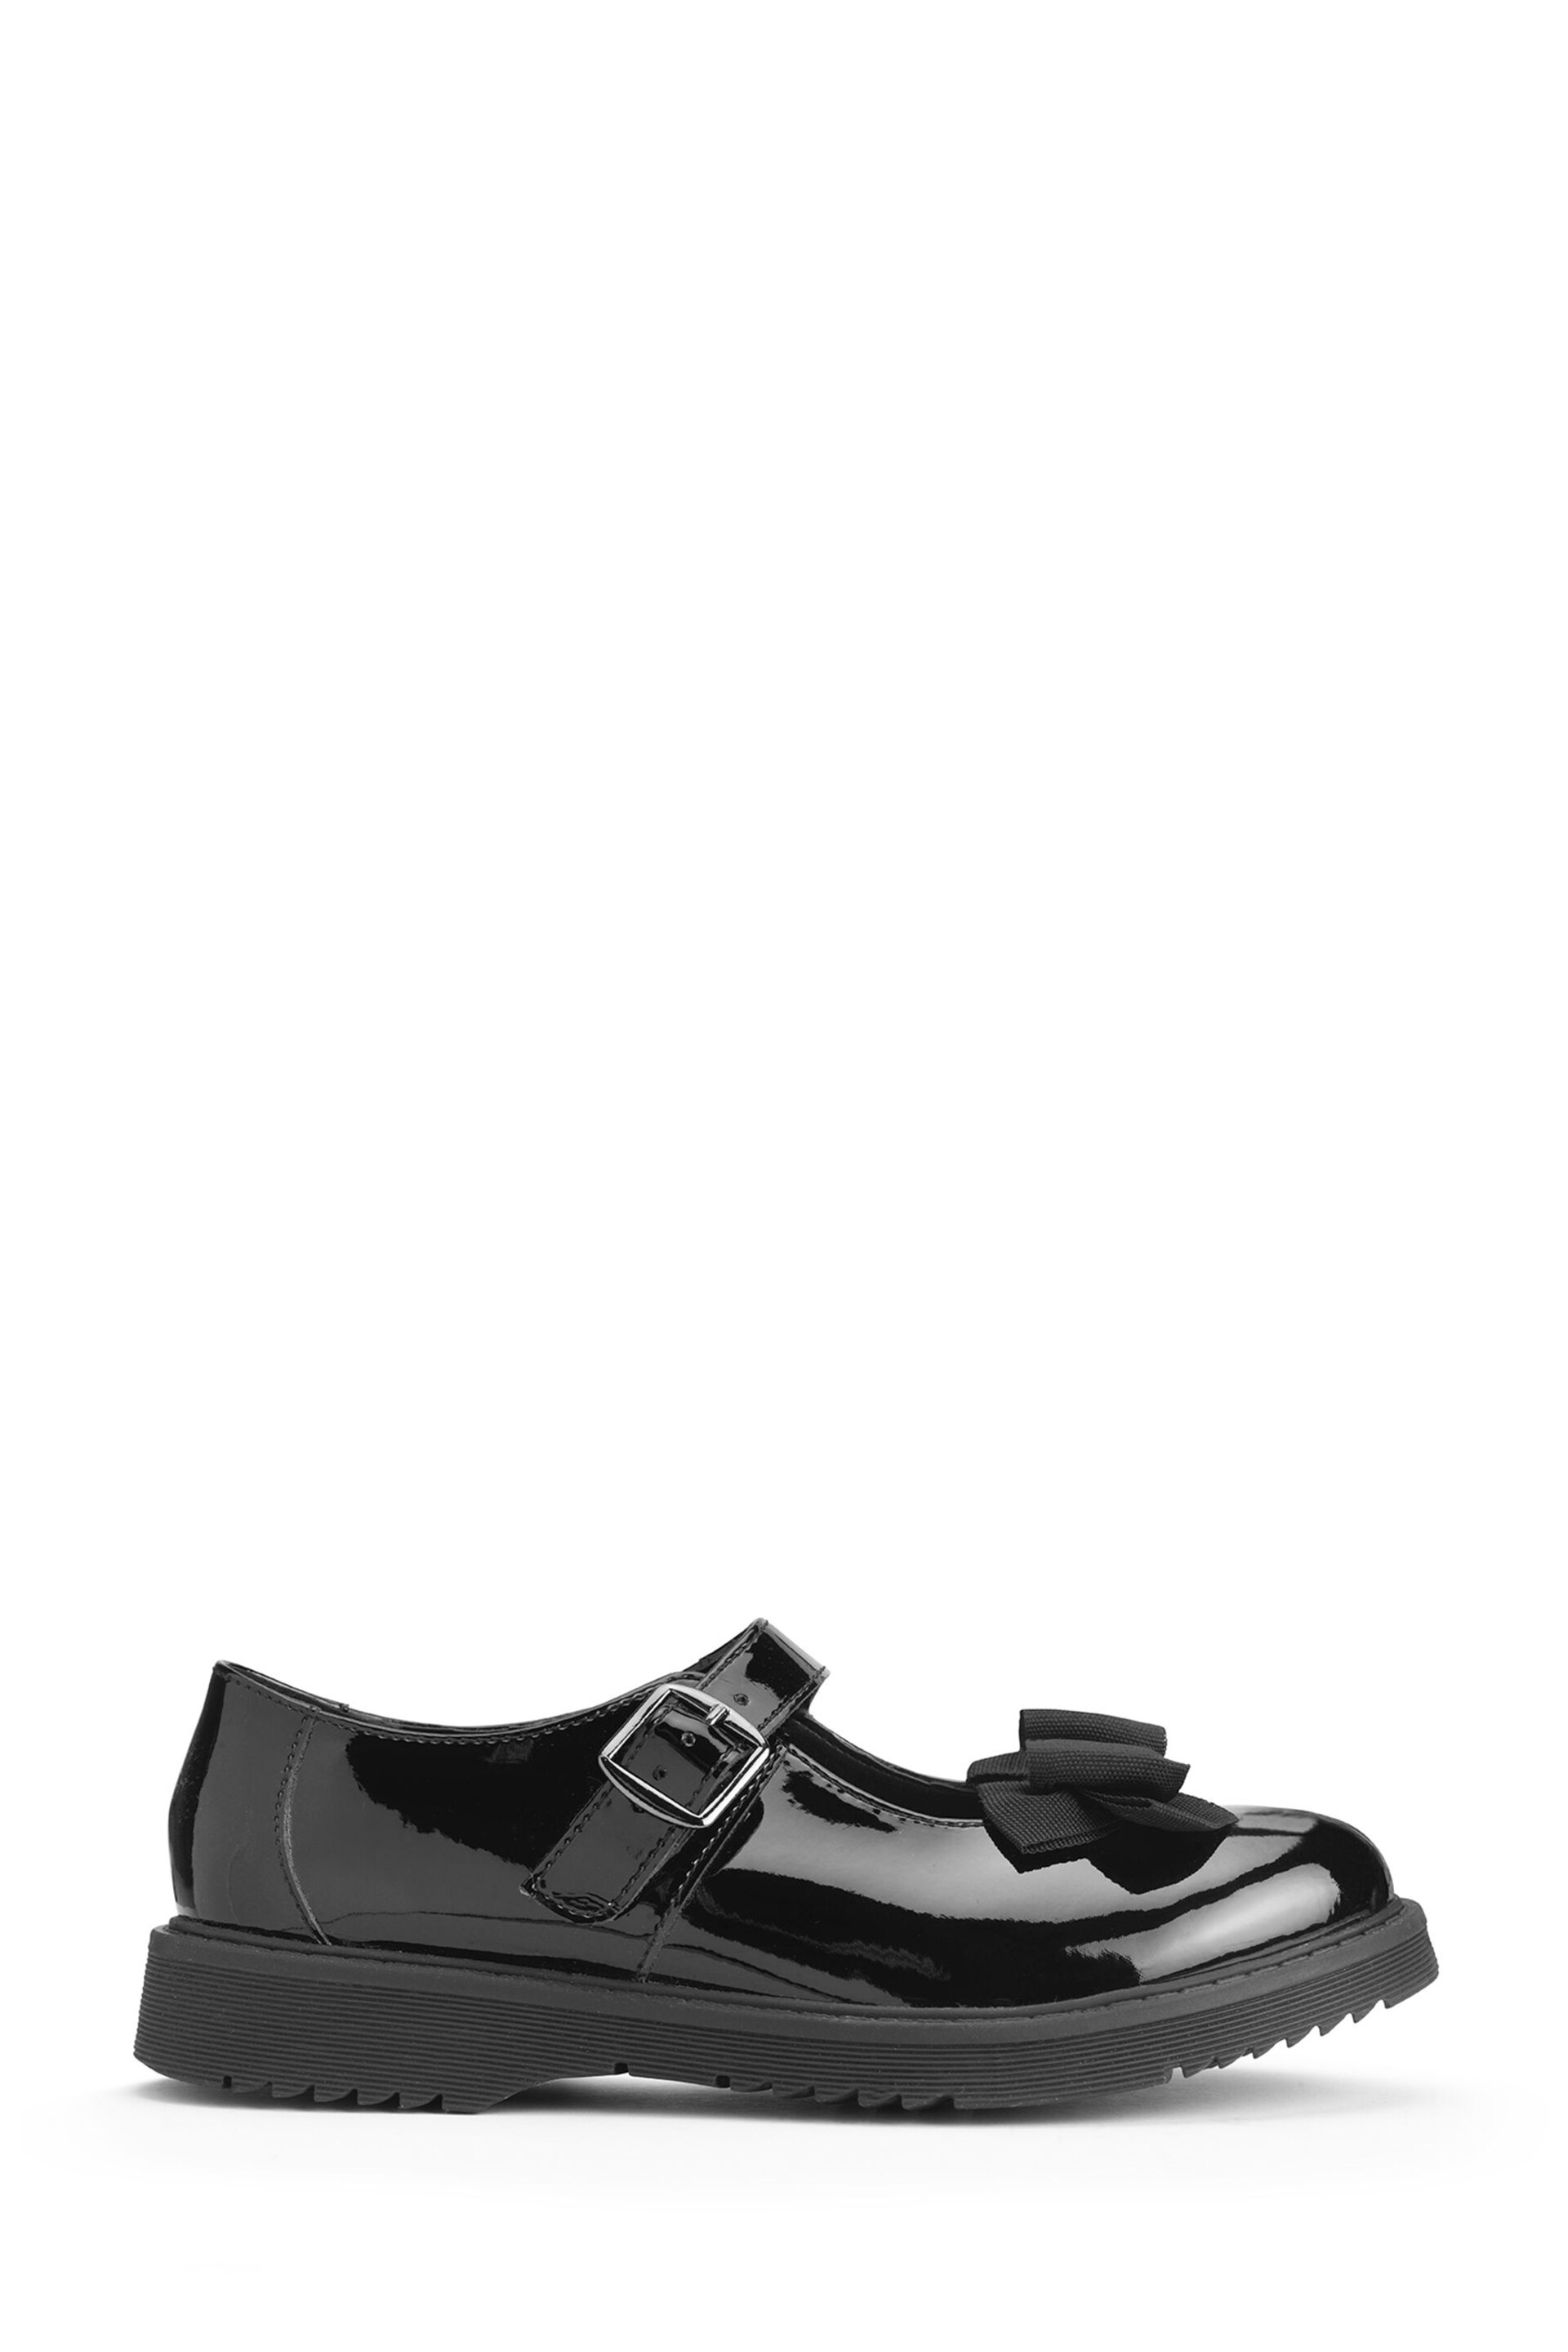 Start Rite Empower Patent Chunky Sole Mary Jane School Black Shoes - Image 1 of 6